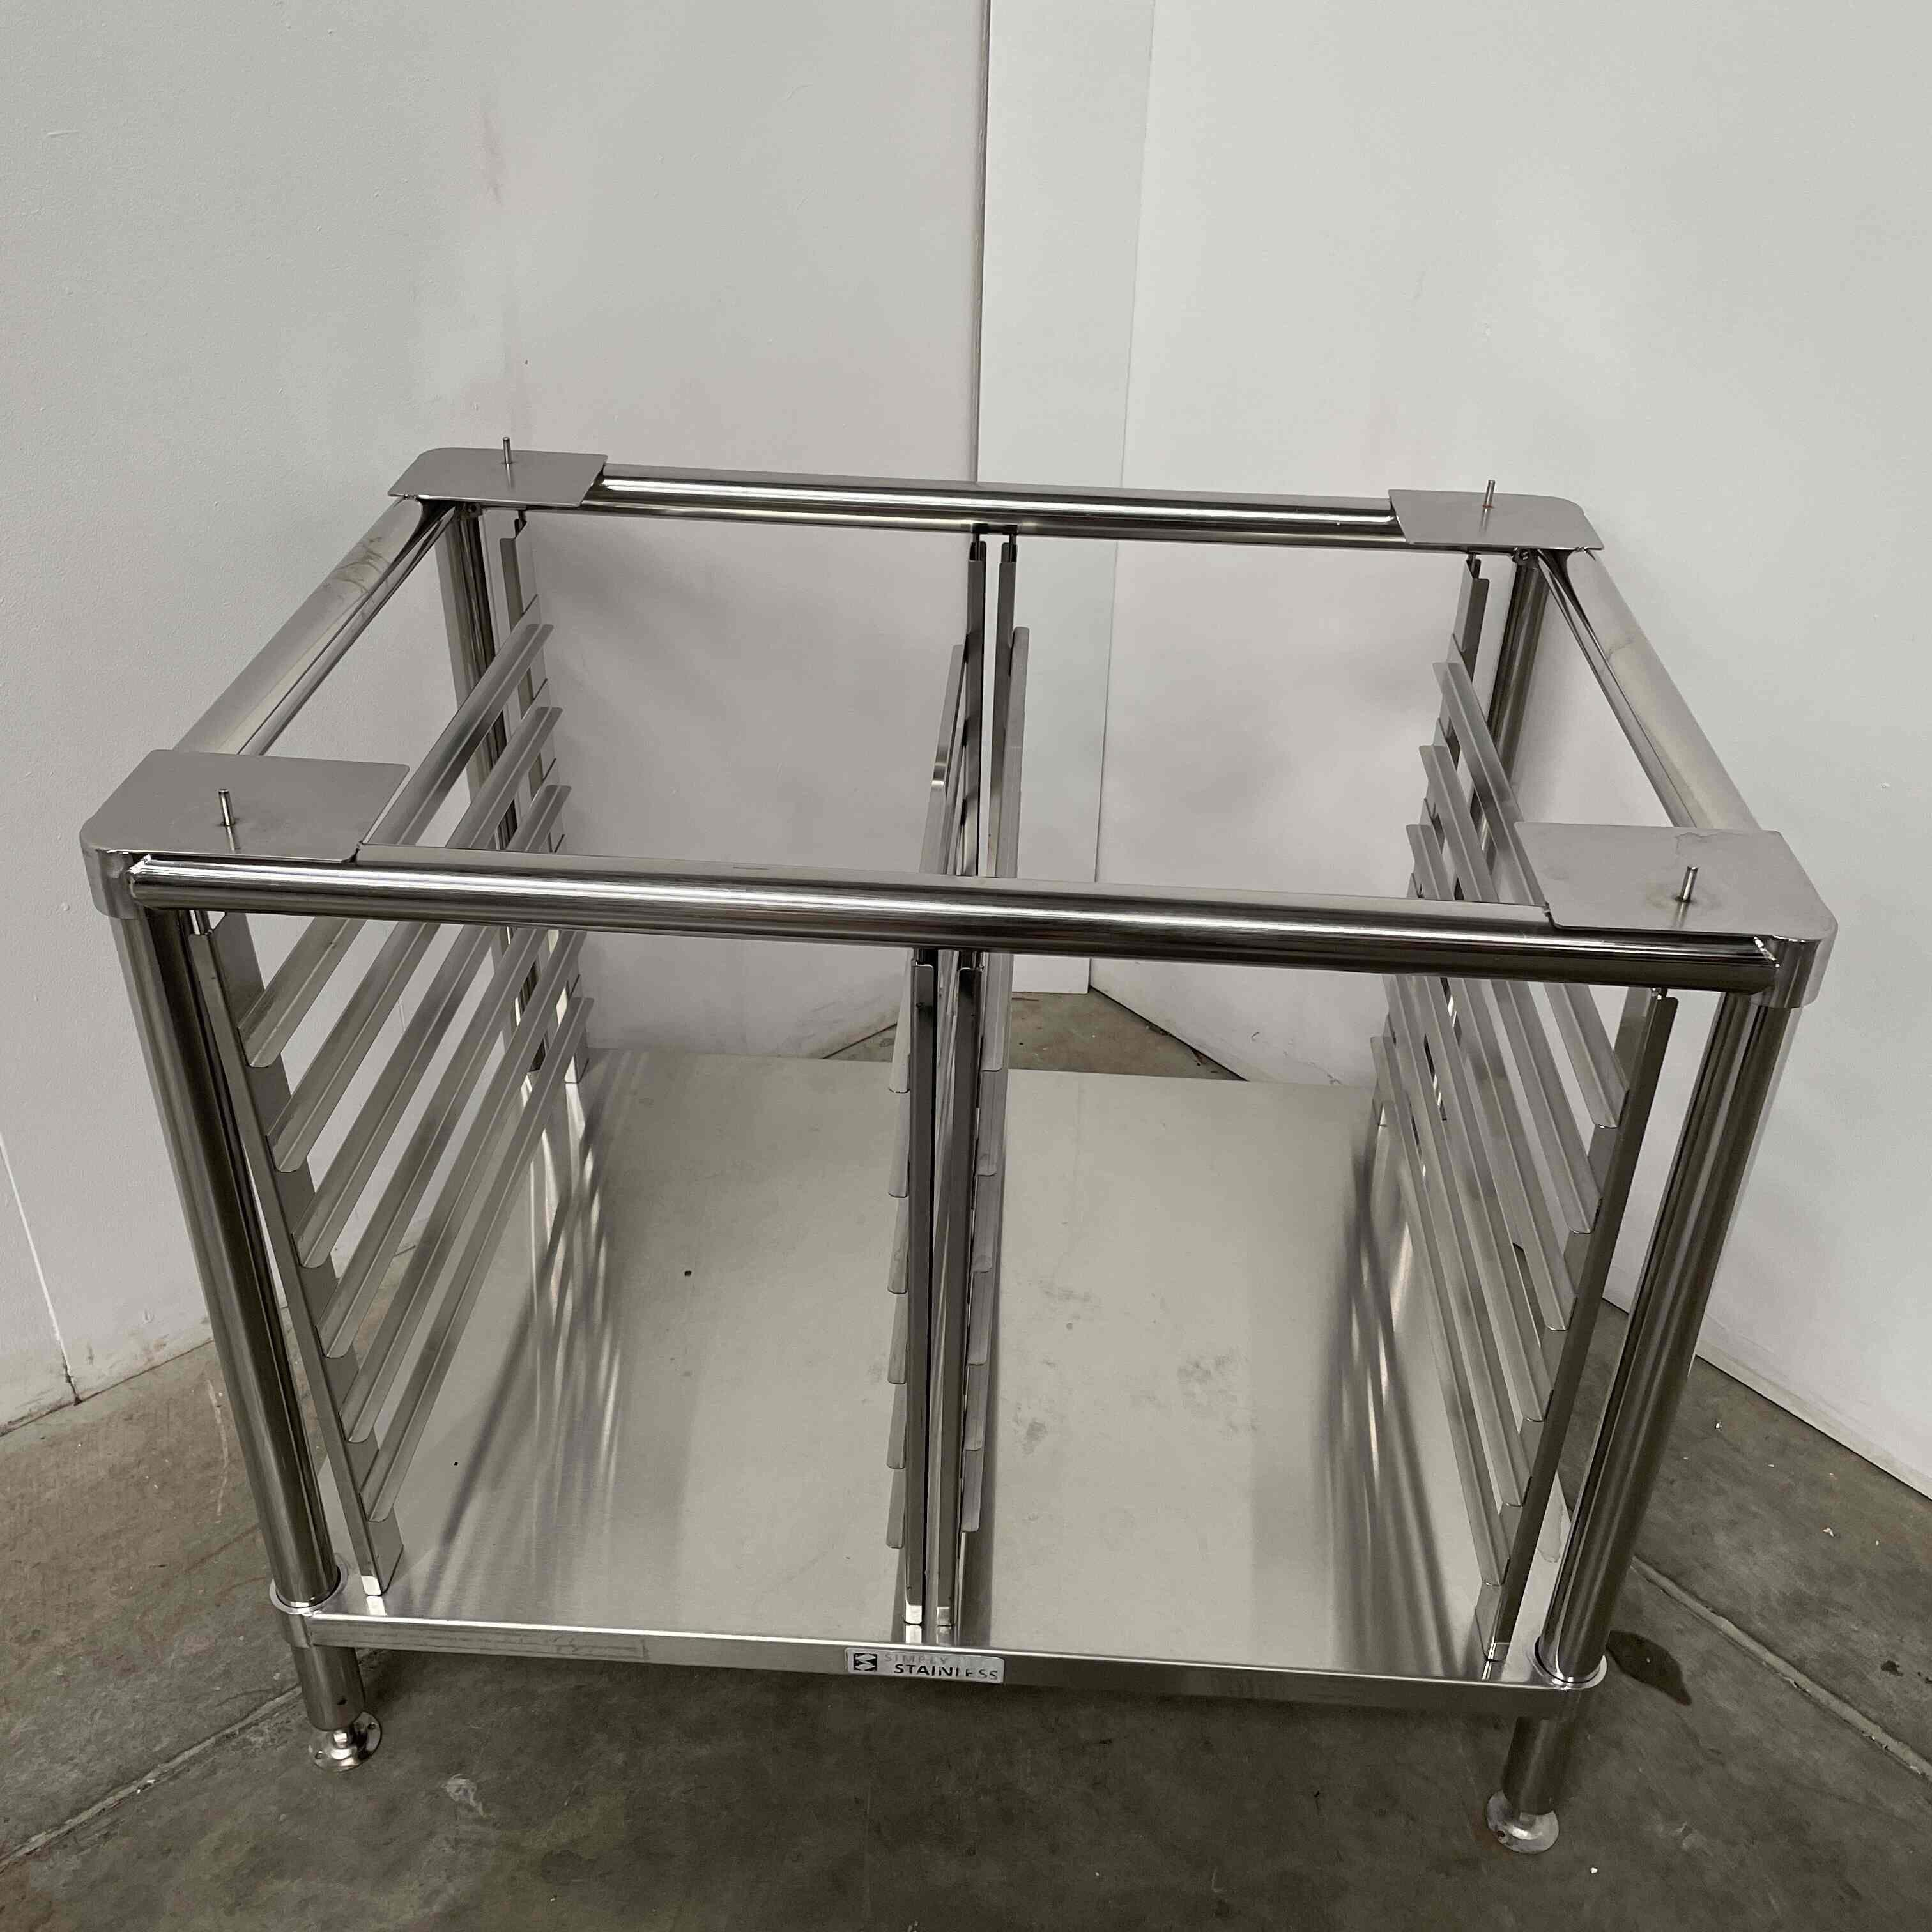 Thumbnail - Simply Stainless Combi Oven Stand